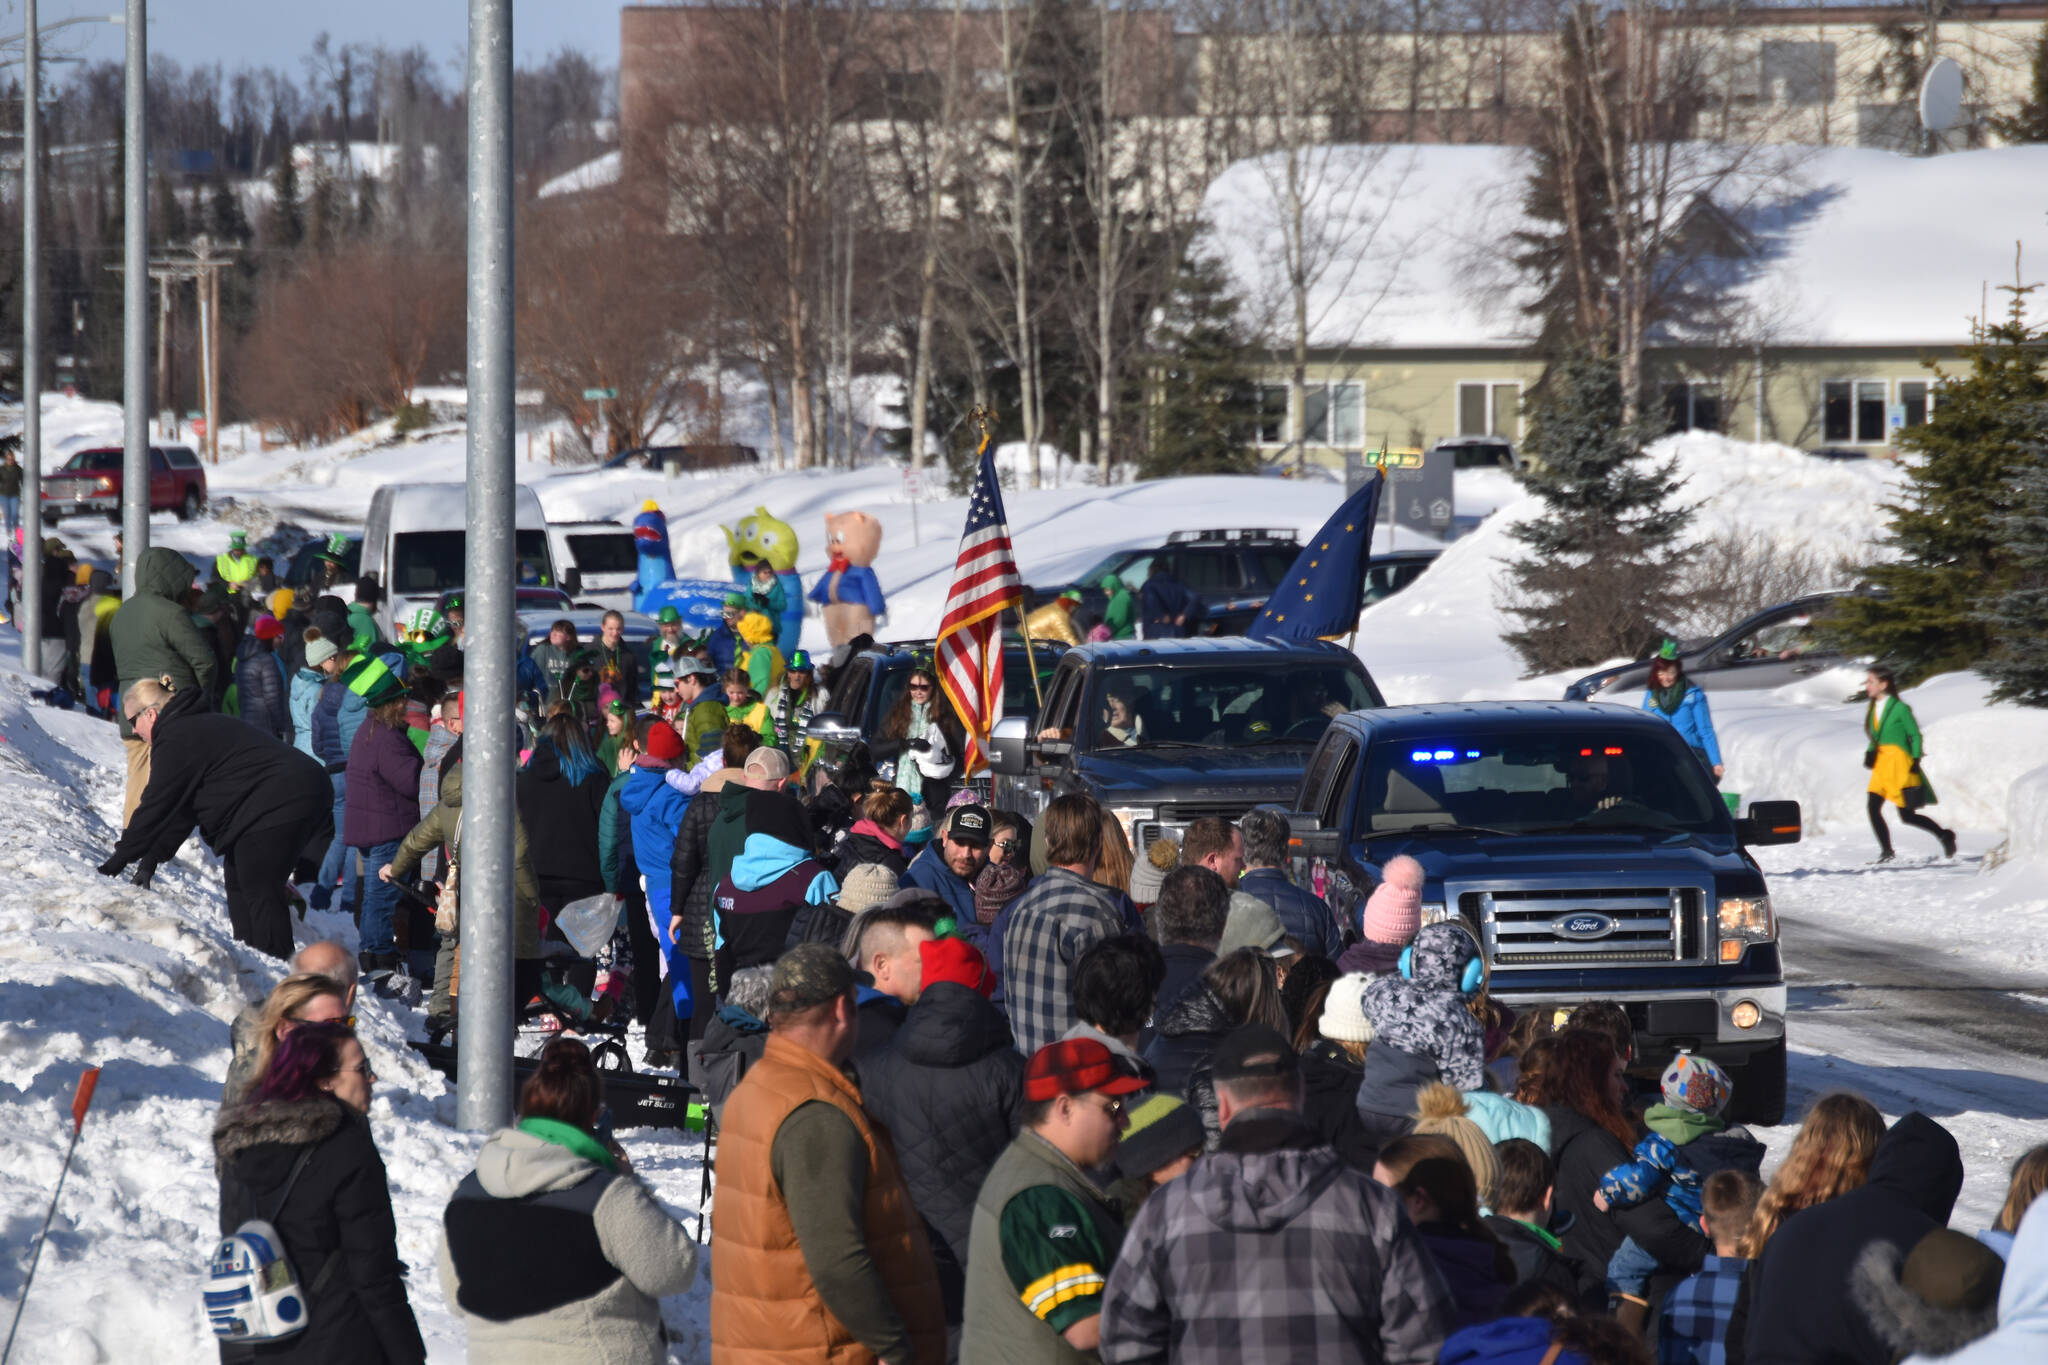 A crowd of parents and children line the sidewalk as the 32nd annual Sweeney’s St. Patrick’s Day Parade proceeds down Fireweed Street in Soldotna, Alaska on Friday, March 17, 2023. (Jake Dye/Peninsula Clarion)